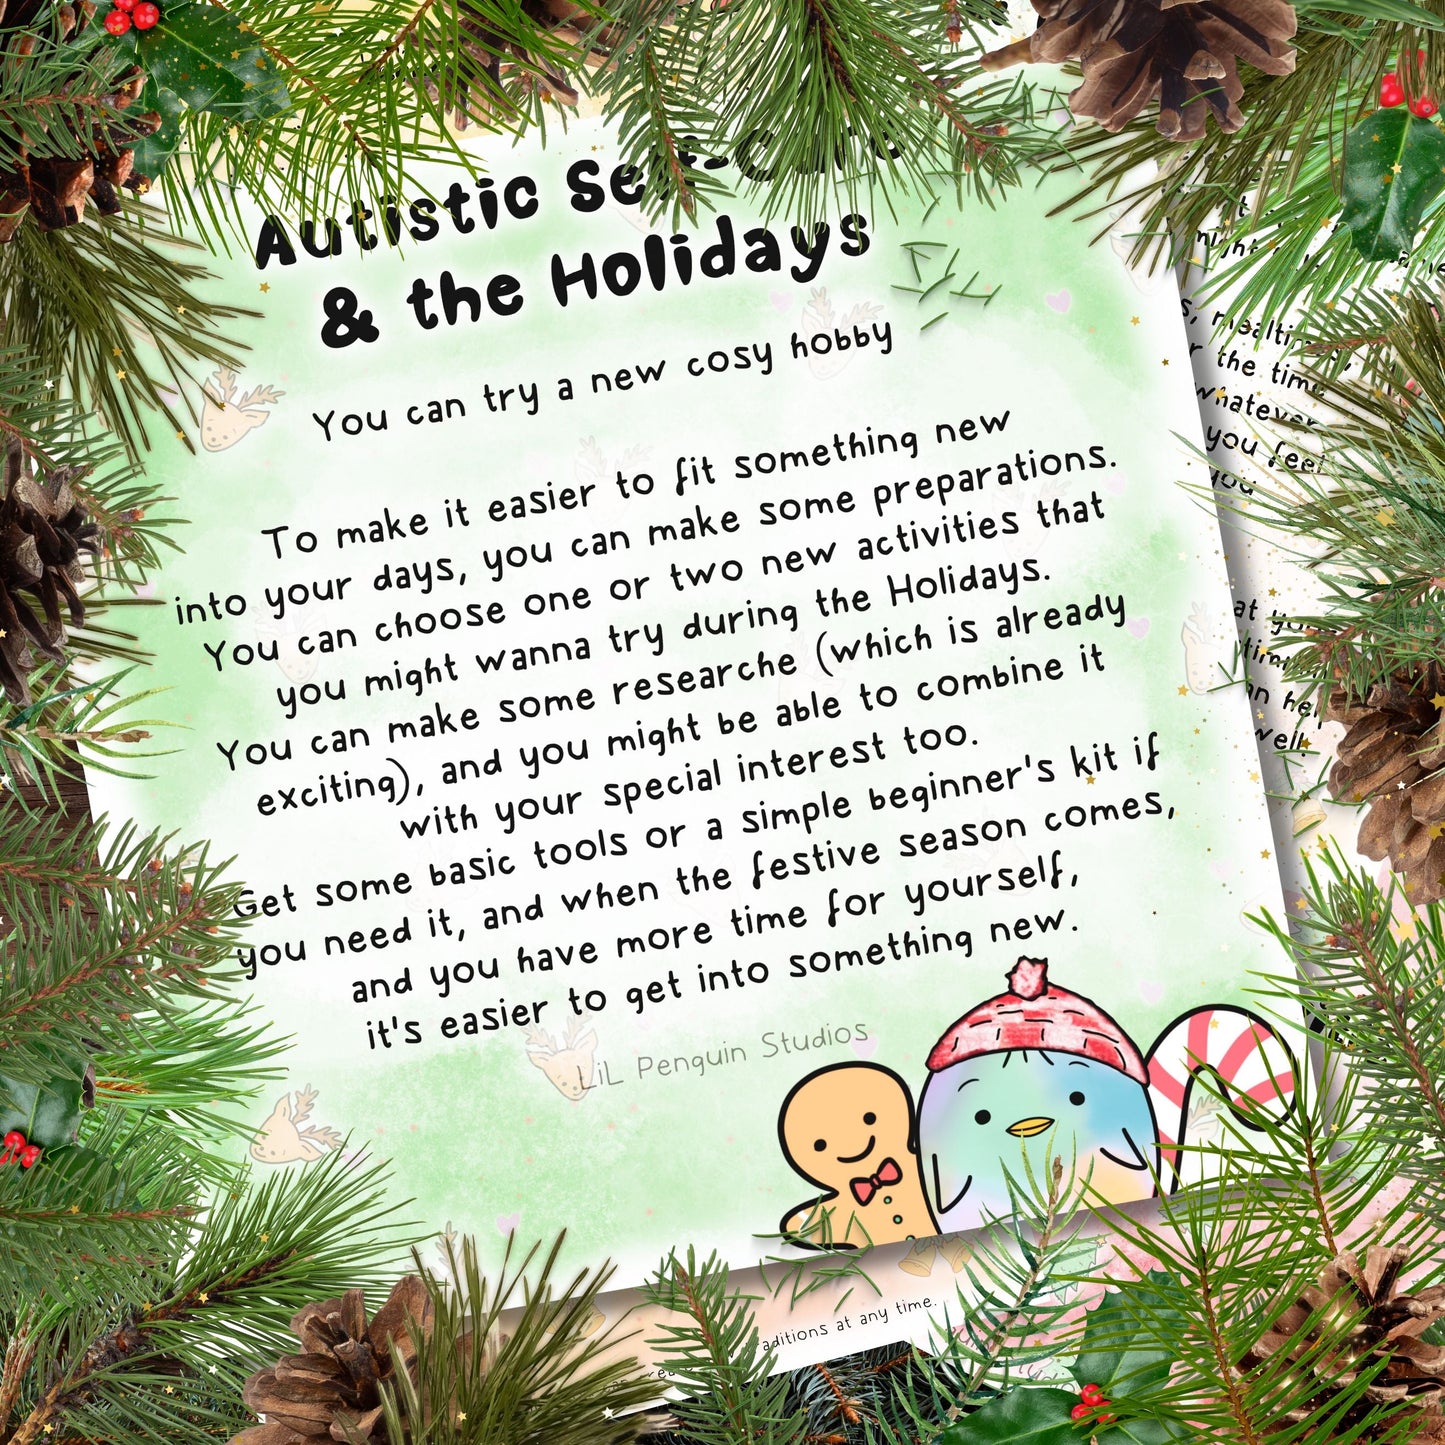 'Autism, Self-Care and the Holidays' Bundle (Printable) - Personal Use